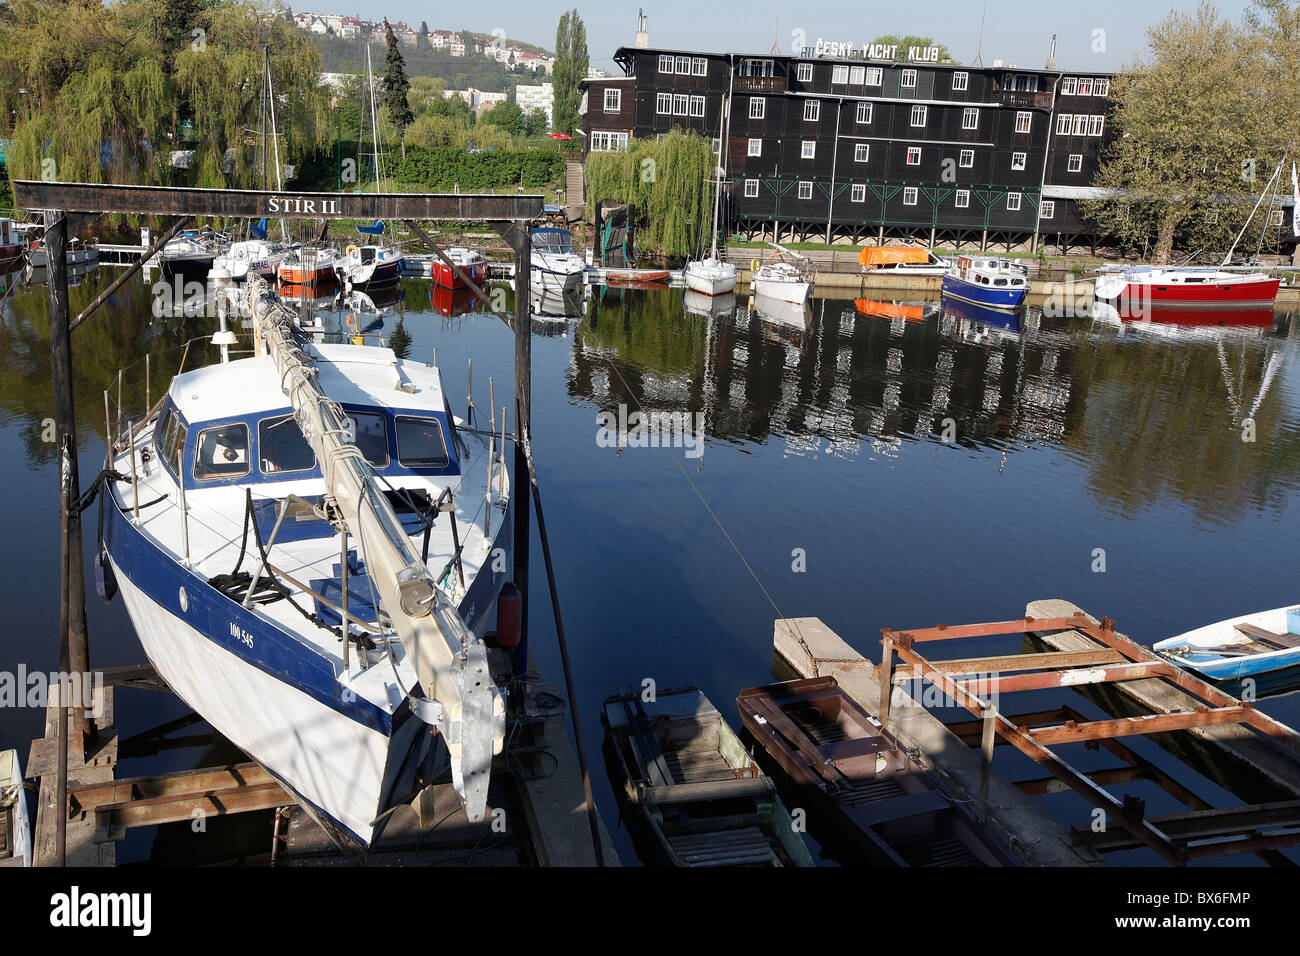 Czech Yacht Club High Resolution Stock Photography and Images - Alamy